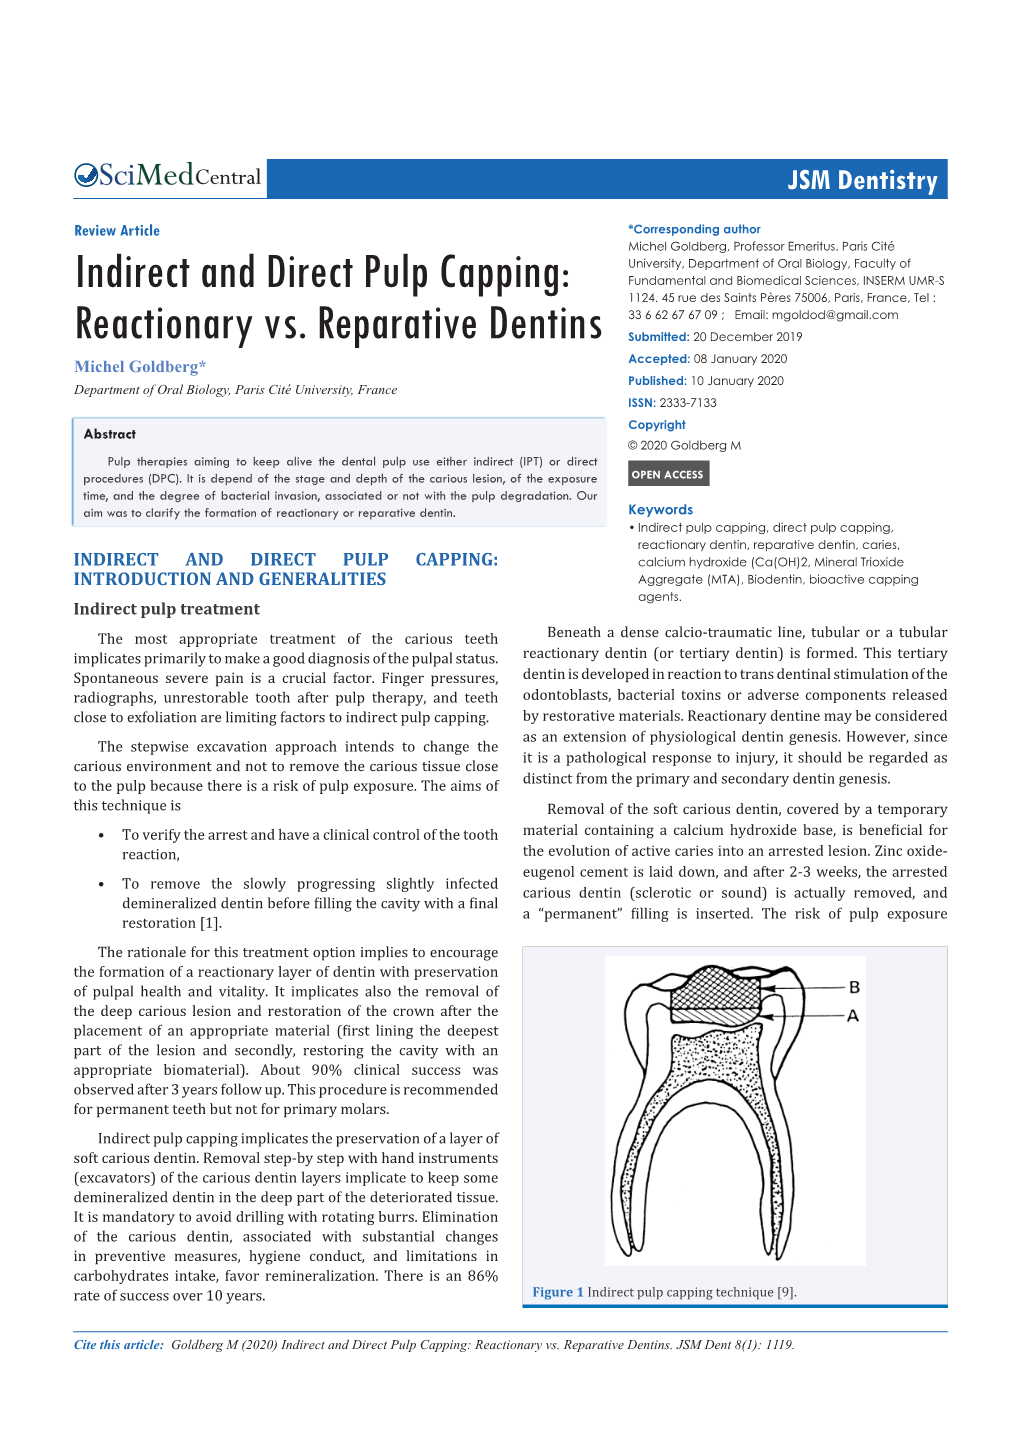 Indirect and Direct Pulp Capping: Reactionary Vs. Reparative Dentins